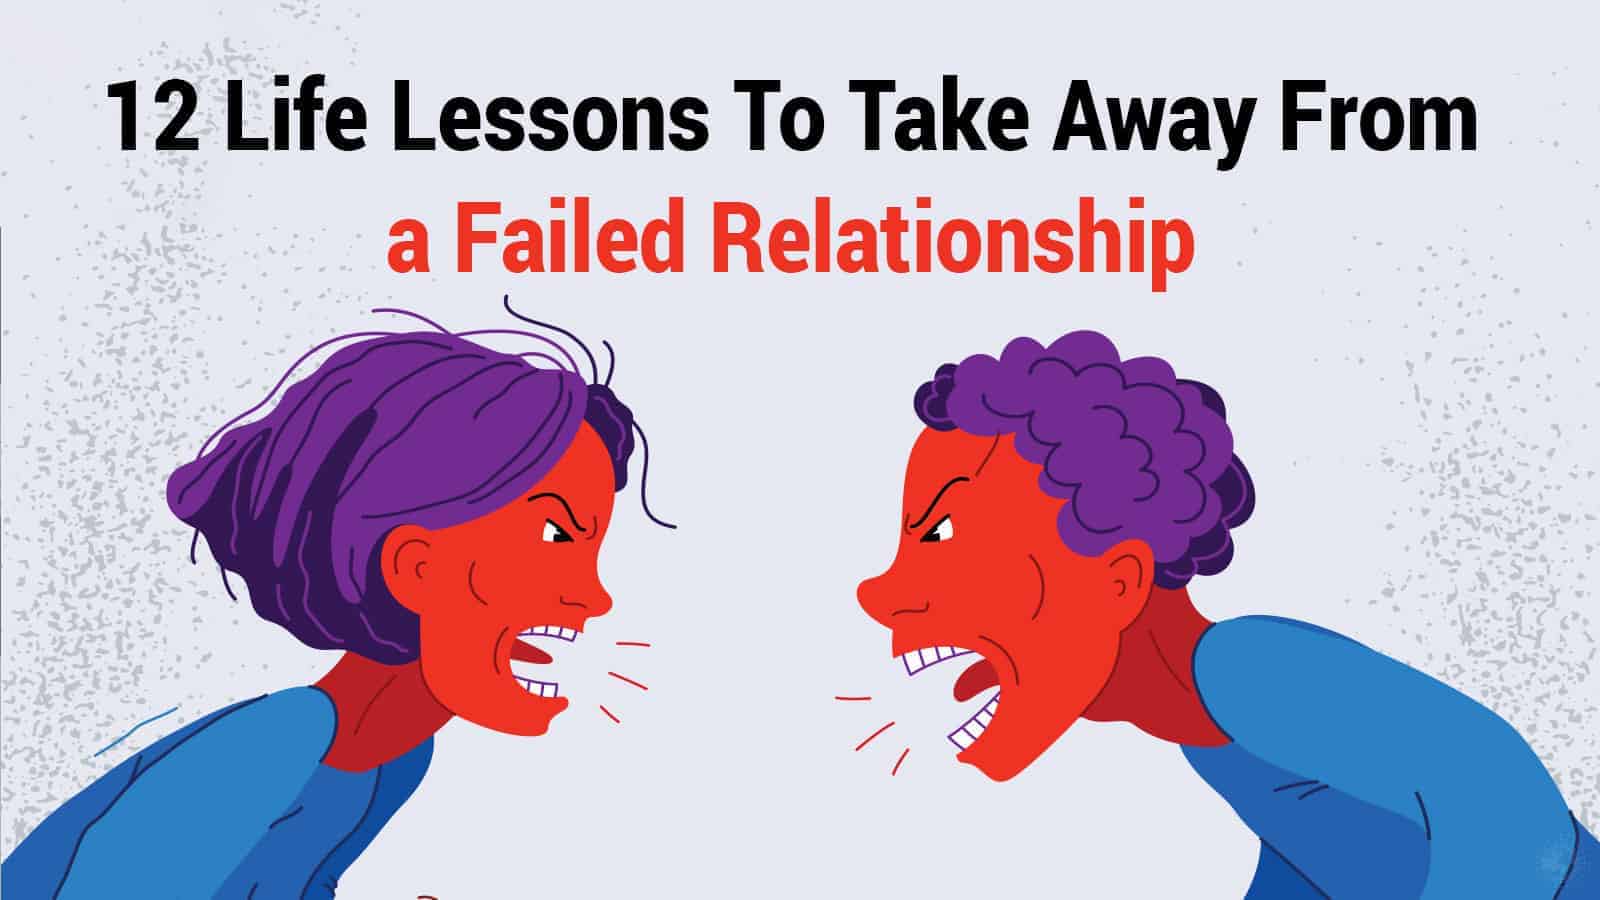 12 Life Lessons To Take Away From a Failed Relationship